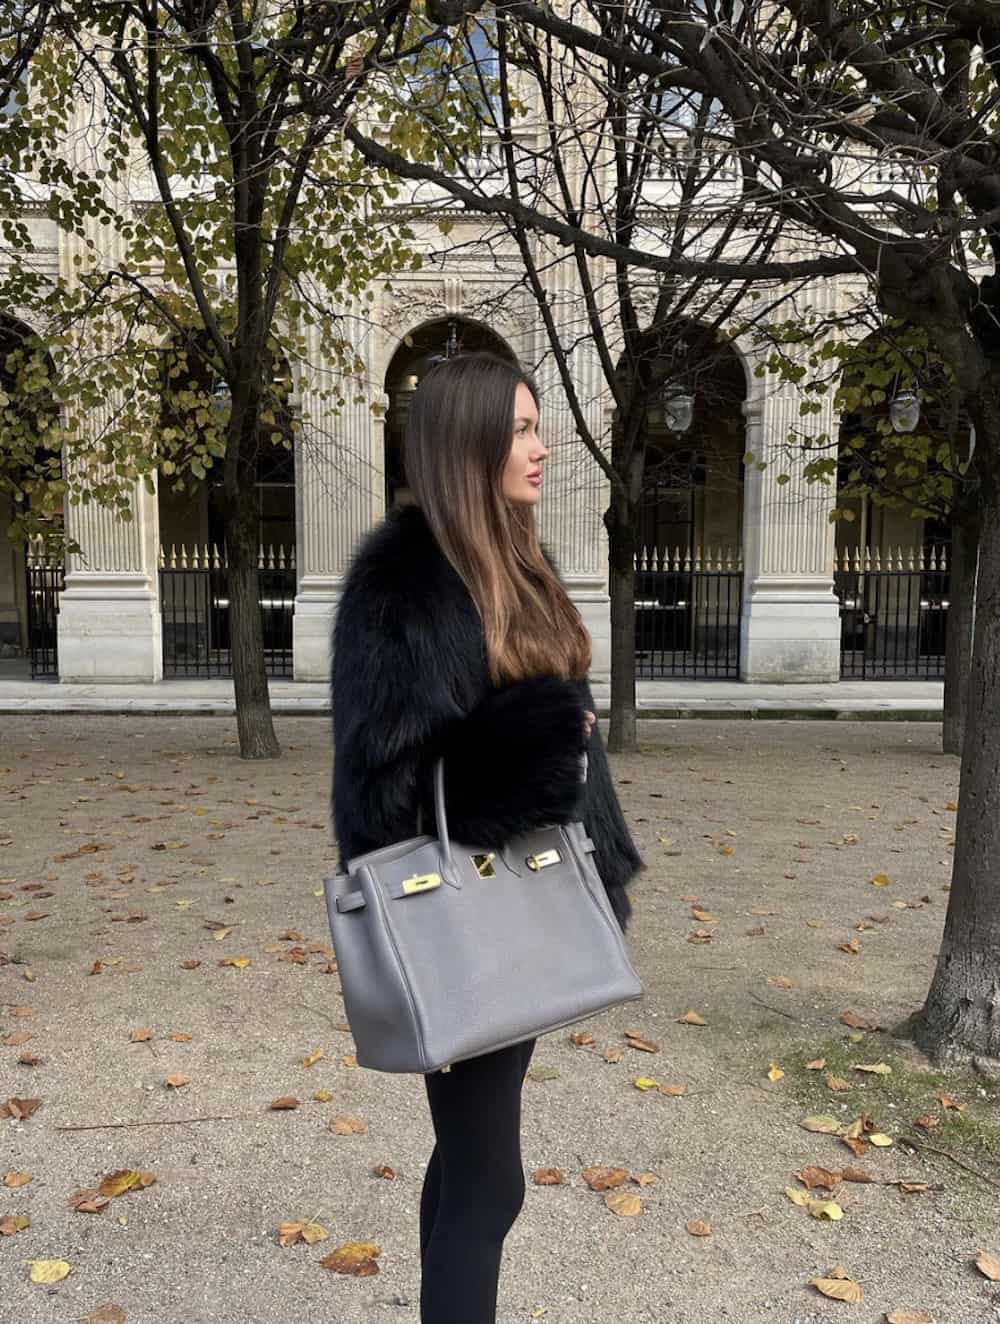 image of a woman in a black faux fur coat carrying a grey Hermes Birkin bag